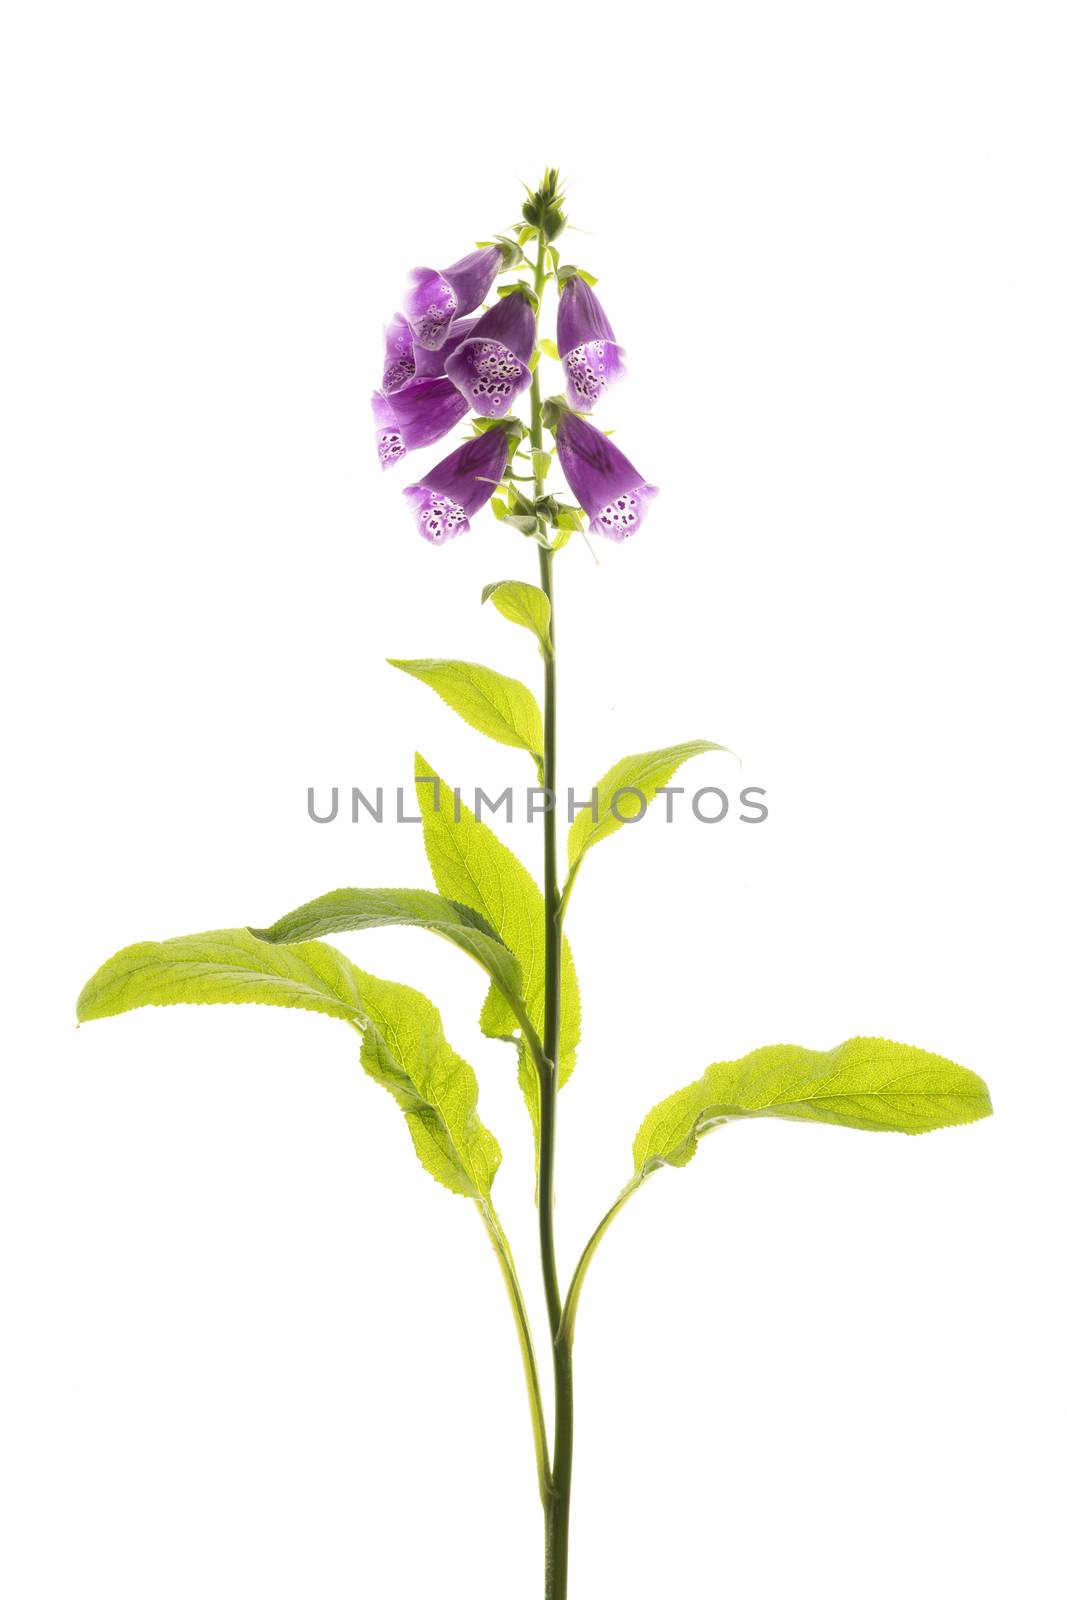 Purple foxglove flowers isolated on white background by sashokddt